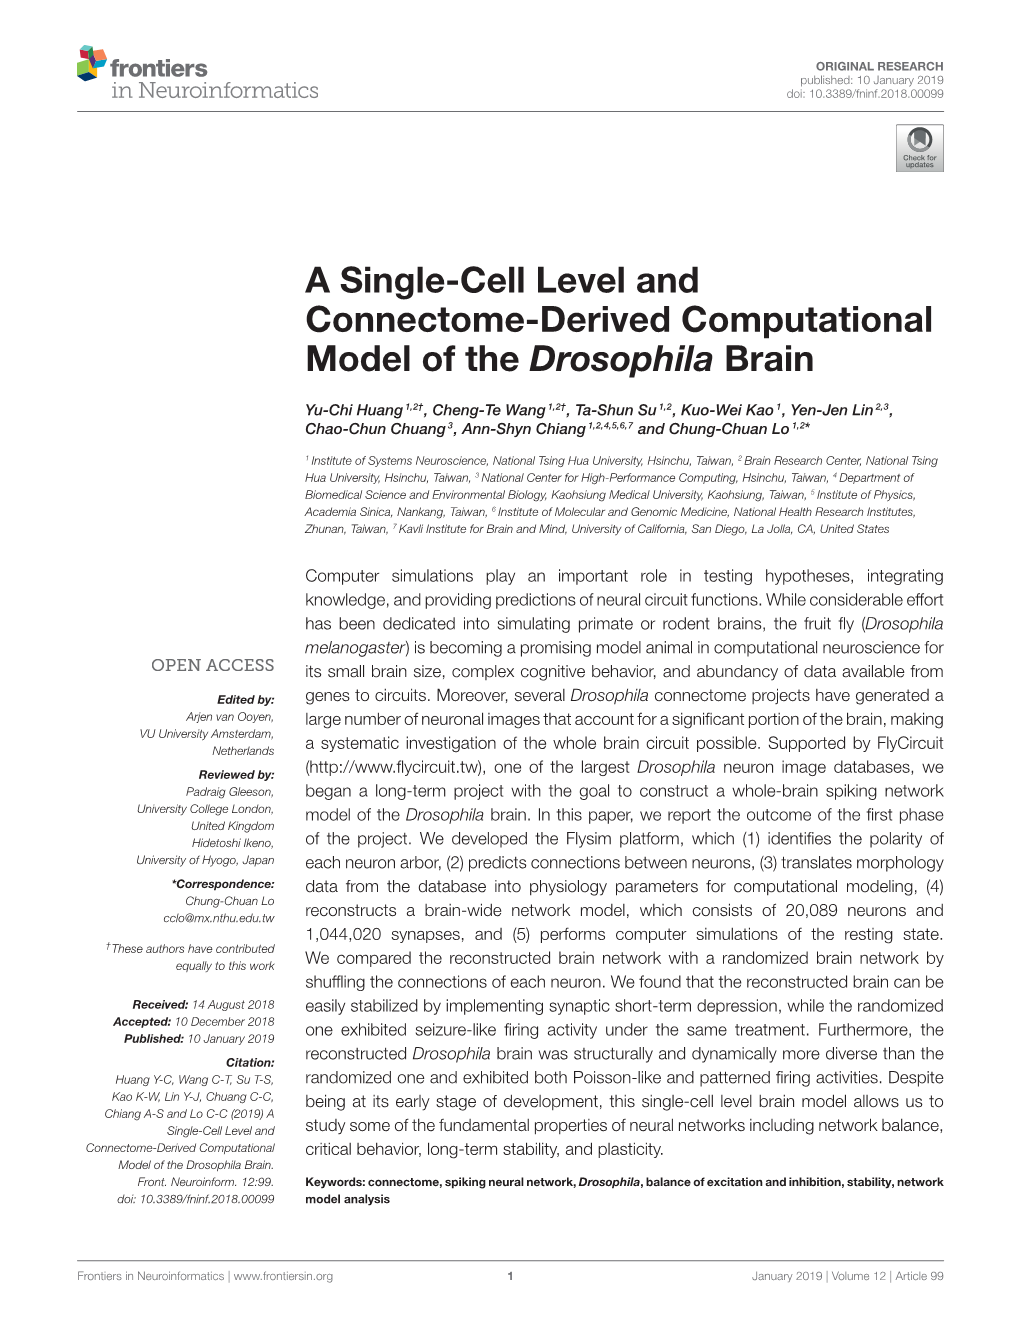 A Single-Cell Level and Connectome-Derived Computational Model of the Drosophila Brain